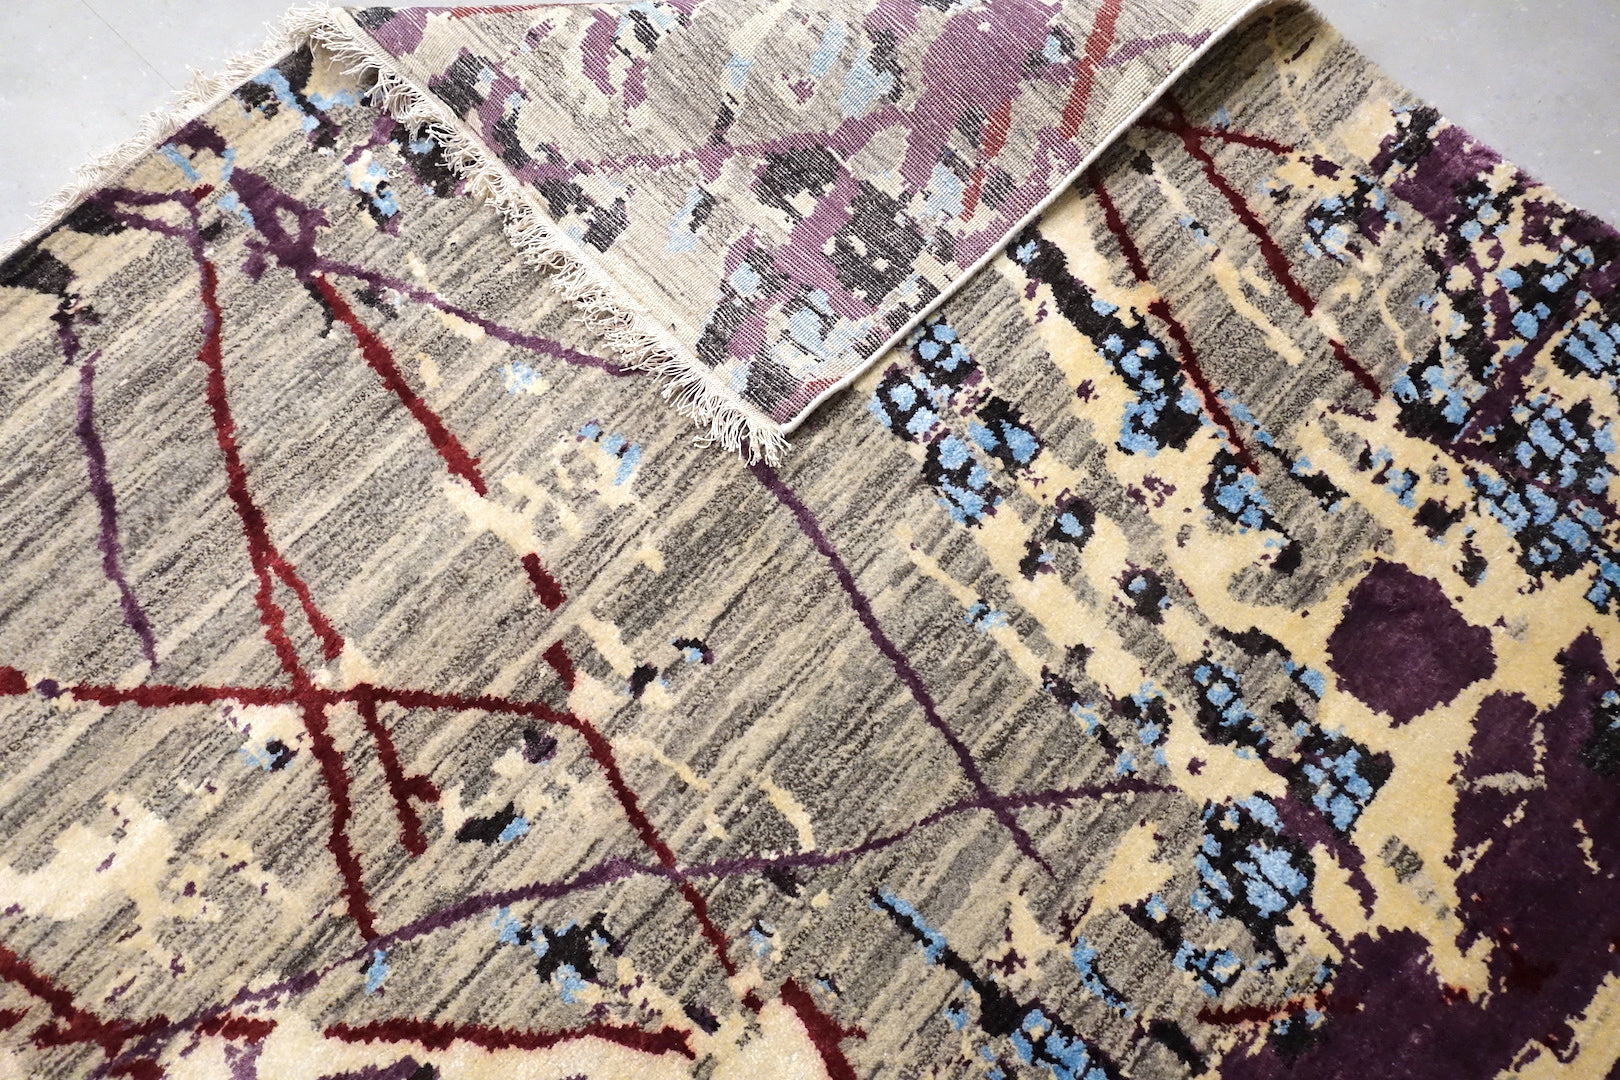 The rug/carpet consists of modern design. With a striped black and white based. Purple and Blue sprawled across like ink spread on paper. The rug is 5 feet by 7 feet. 